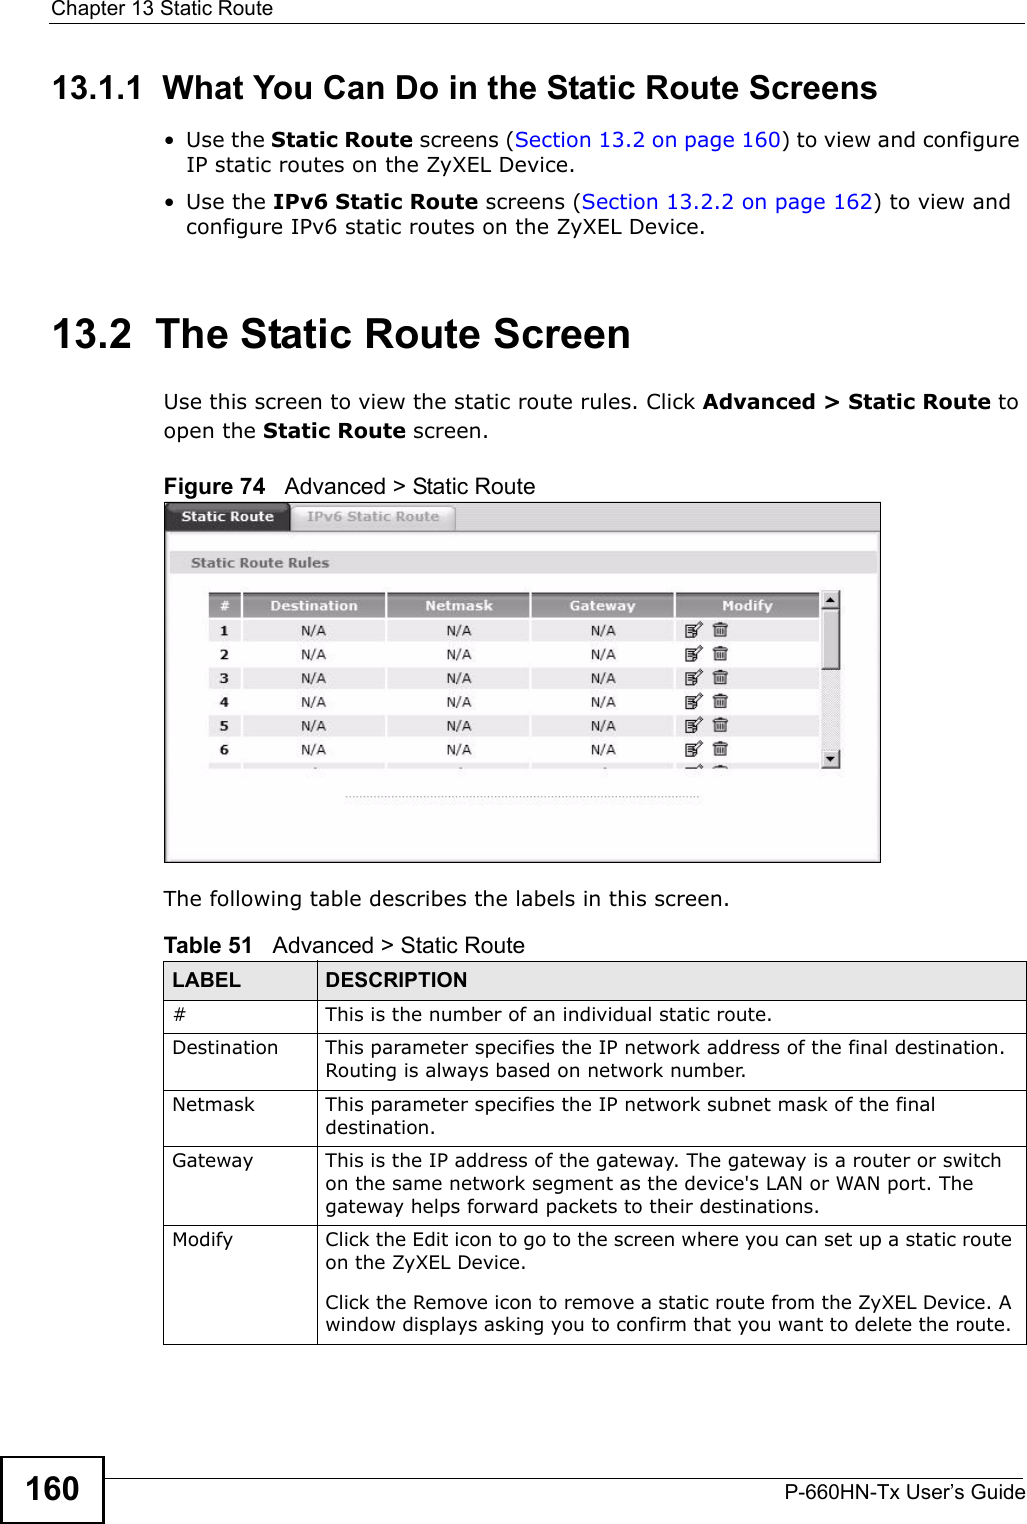 Chapter 13 Static RouteP-660HN-Tx User’s Guide16013.1.1  What You Can Do in the Static Route Screens•Use the Static Route screens (Section 13.2 on page 160) to view and configure IP static routes on the ZyXEL Device.•Use the IPv6 Static Route screens (Section 13.2.2 on page 162) to view and configure IPv6 static routes on the ZyXEL Device.13.2  The Static Route ScreenUse this screen to view the static route rules. Click Advanced &gt; Static Route to open the Static Route screen.Figure 74   Advanced &gt; Static RouteThe following table describes the labels in this screen. Table 51   Advanced &gt; Static RouteLABEL DESCRIPTION#This is the number of an individual static route.Destination This parameter specifies the IP network address of the final destination. Routing is always based on network number. Netmask This parameter specifies the IP network subnet mask of the final destination.Gateway This is the IP address of the gateway. The gateway is a router or switch on the same network segment as the device&apos;s LAN or WAN port. The gateway helps forward packets to their destinations.Modify Click the Edit icon to go to the screen where you can set up a static route on the ZyXEL Device.Click the Remove icon to remove a static route from the ZyXEL Device. A window displays asking you to confirm that you want to delete the route. 